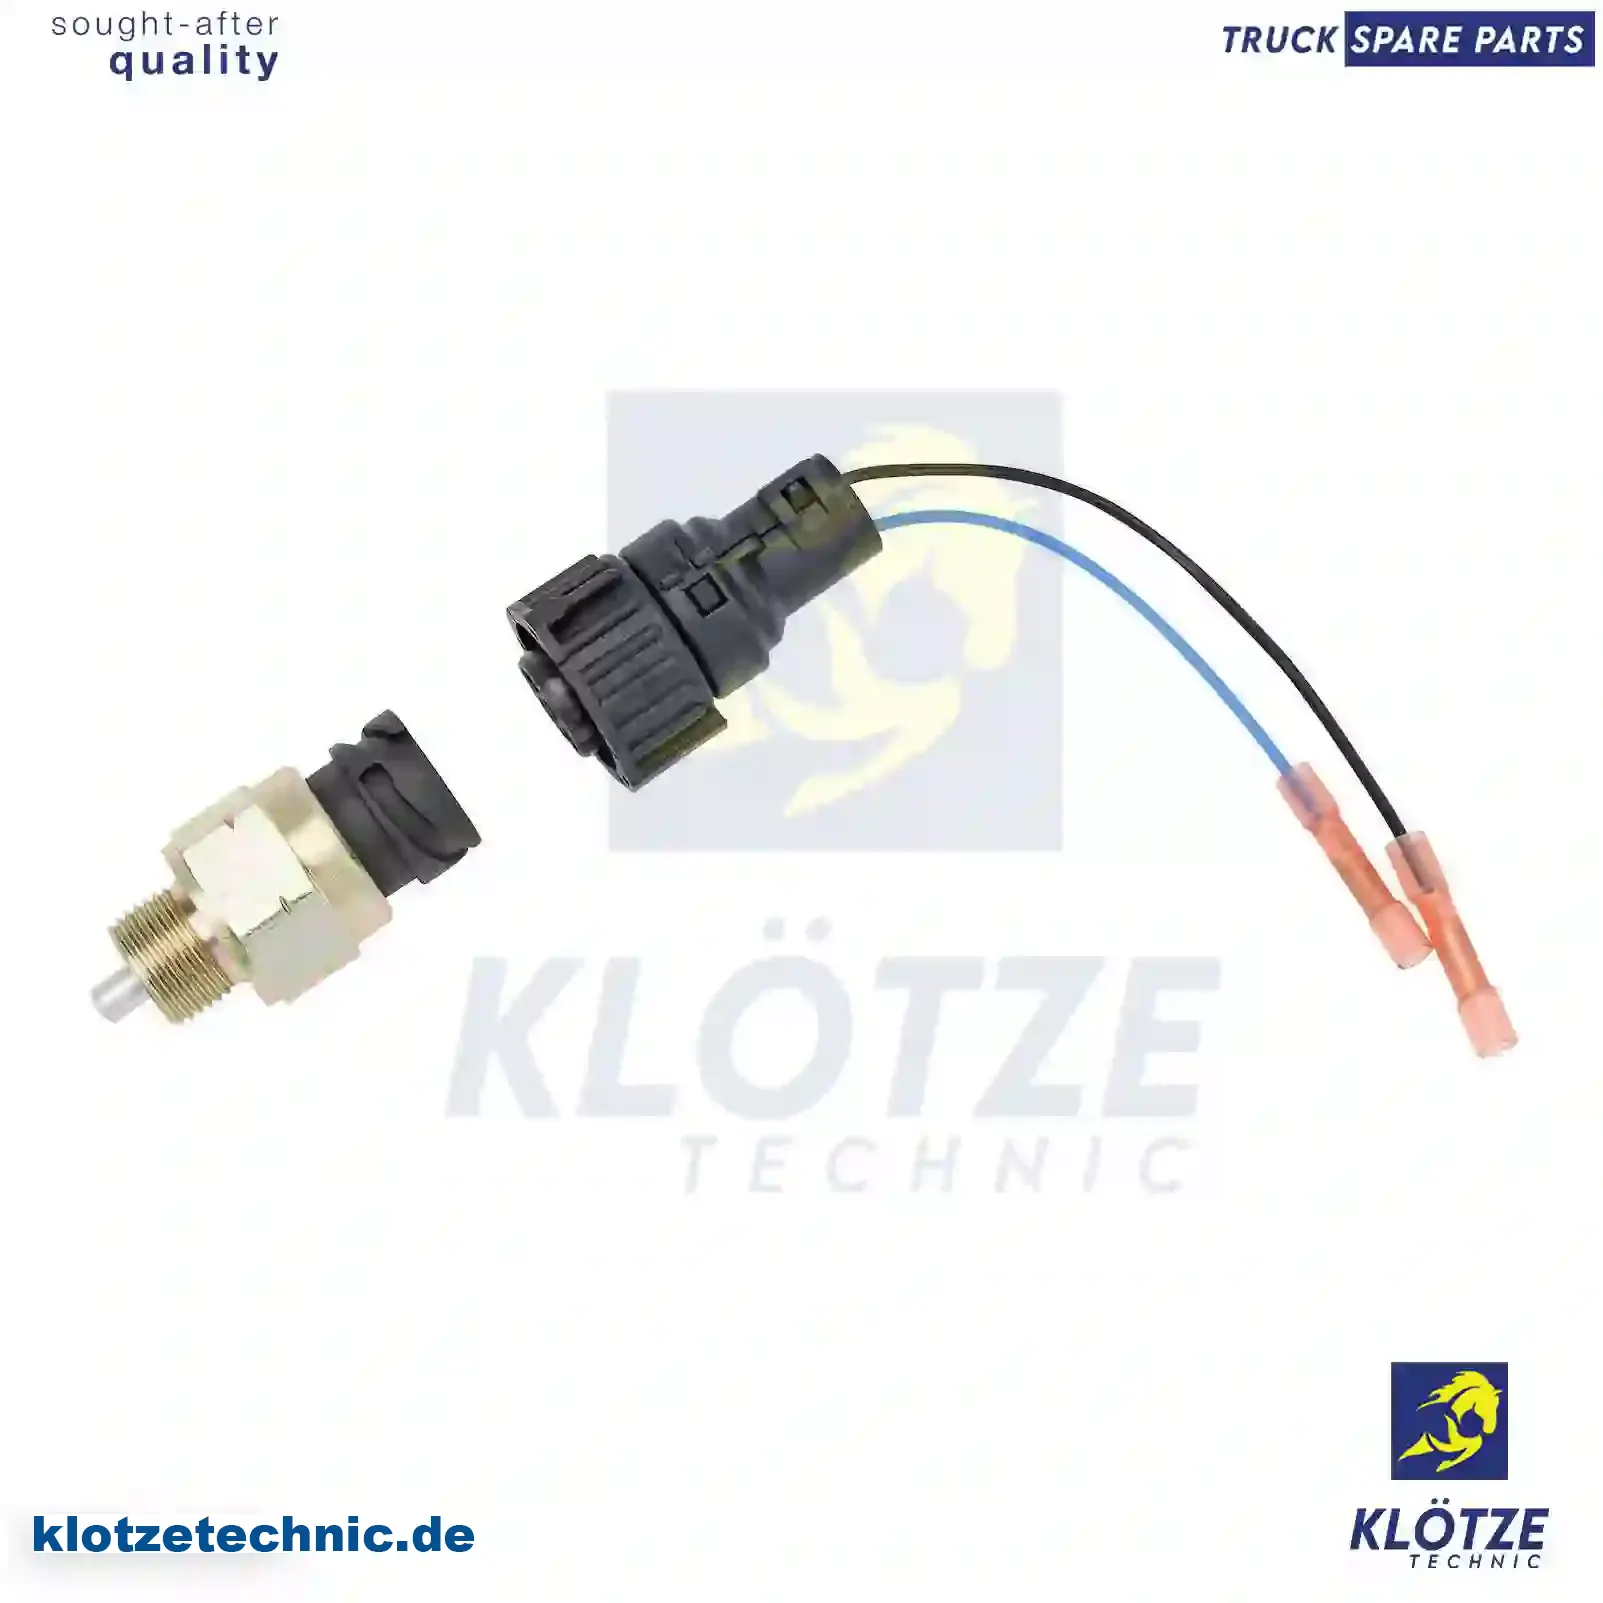 Switch, with adapter cable, 81255250156, 2V5919457 || Klötze Technic